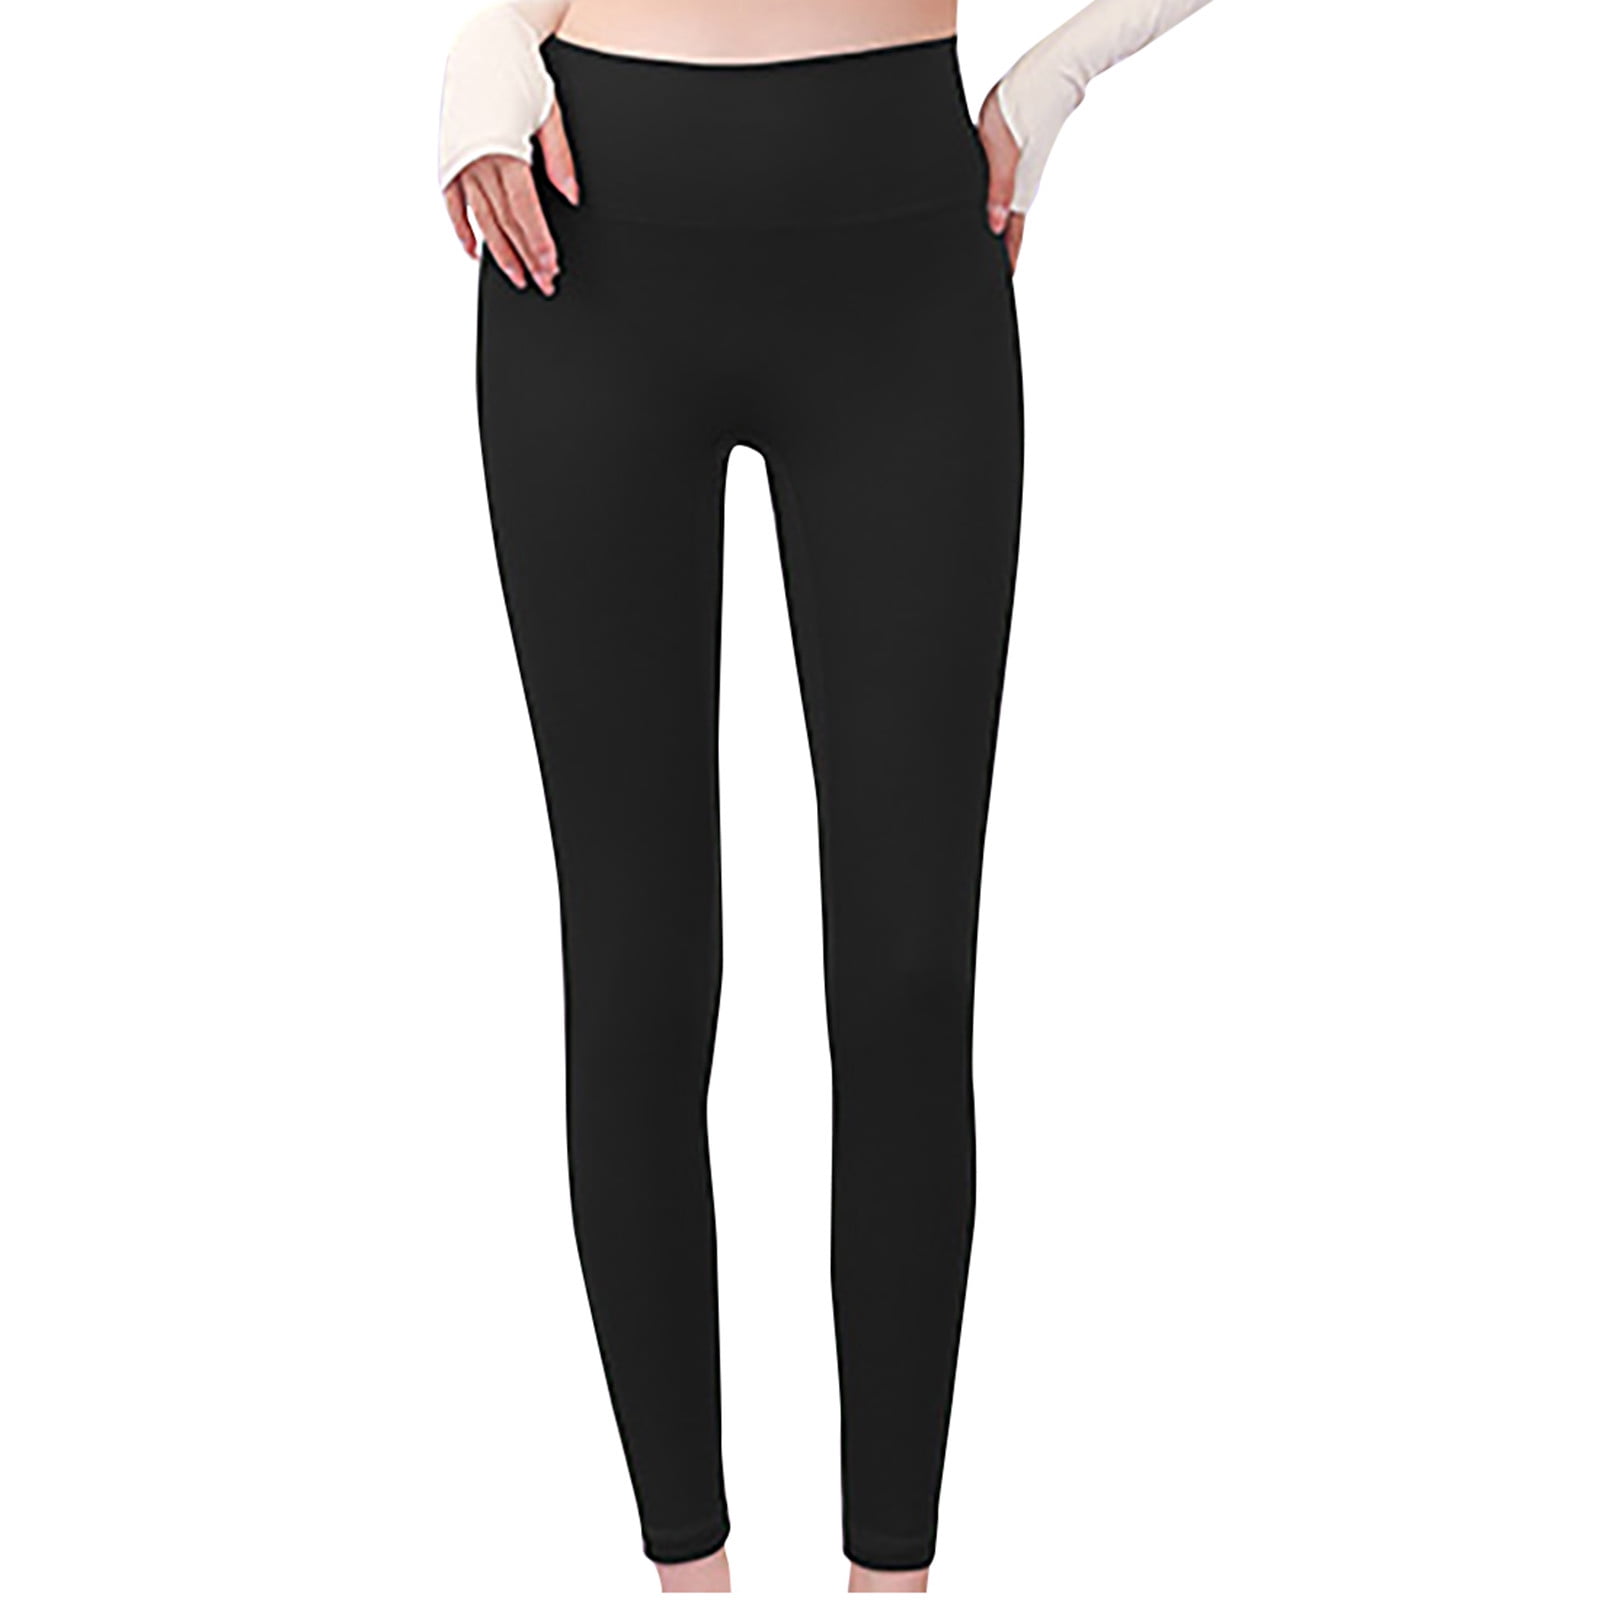 Jalioing Yoga Sweatpants for Women Seamless Elastic Waist Flattering Soft  Solid Color Skinny Sports Pants (XX-Large, Black)